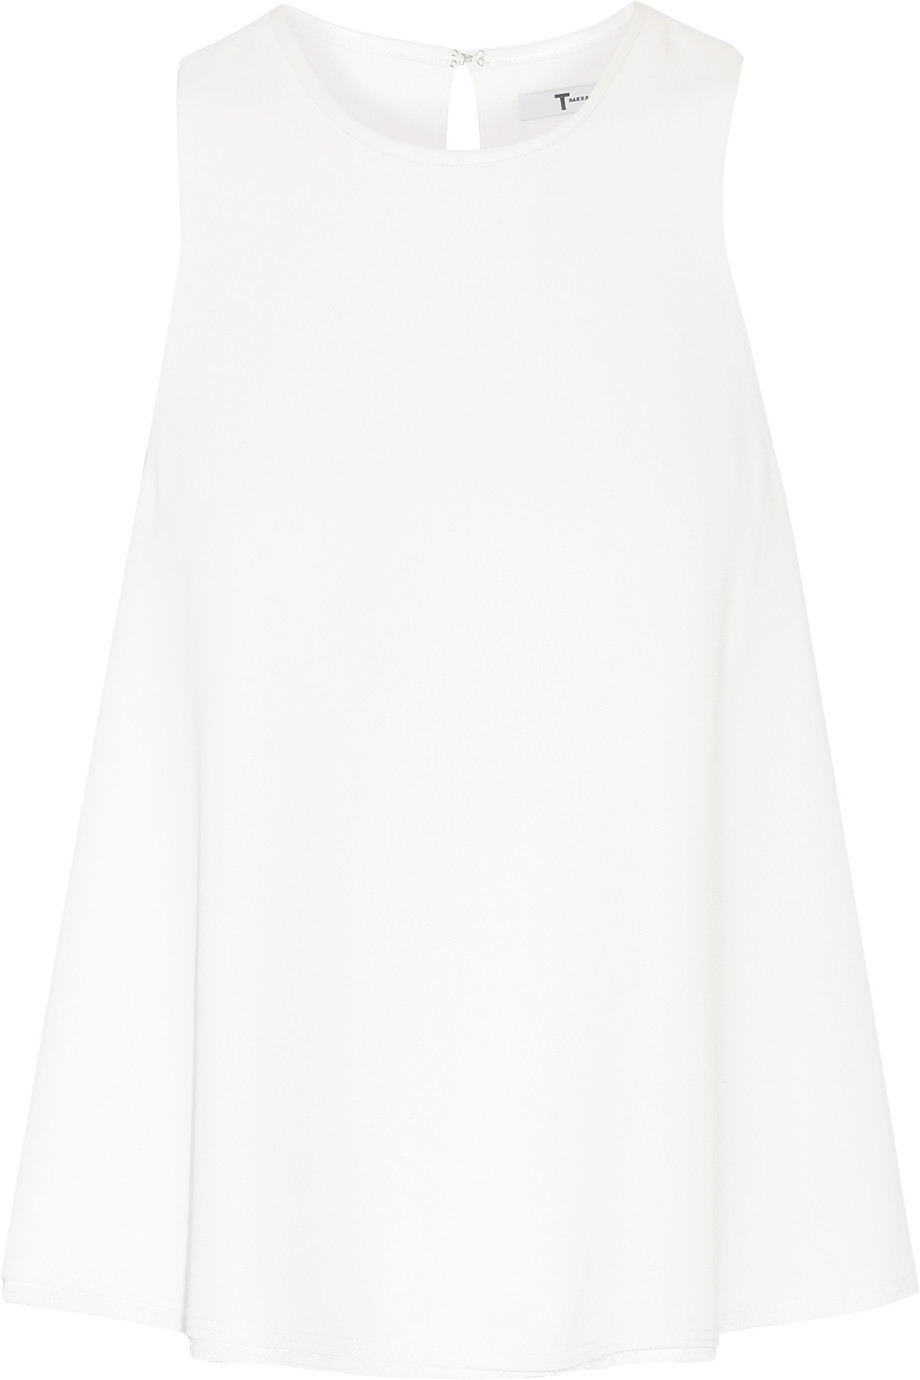 Alexander Wang T Asymmetric Leather-trimmed Crepe Top | ModeSens